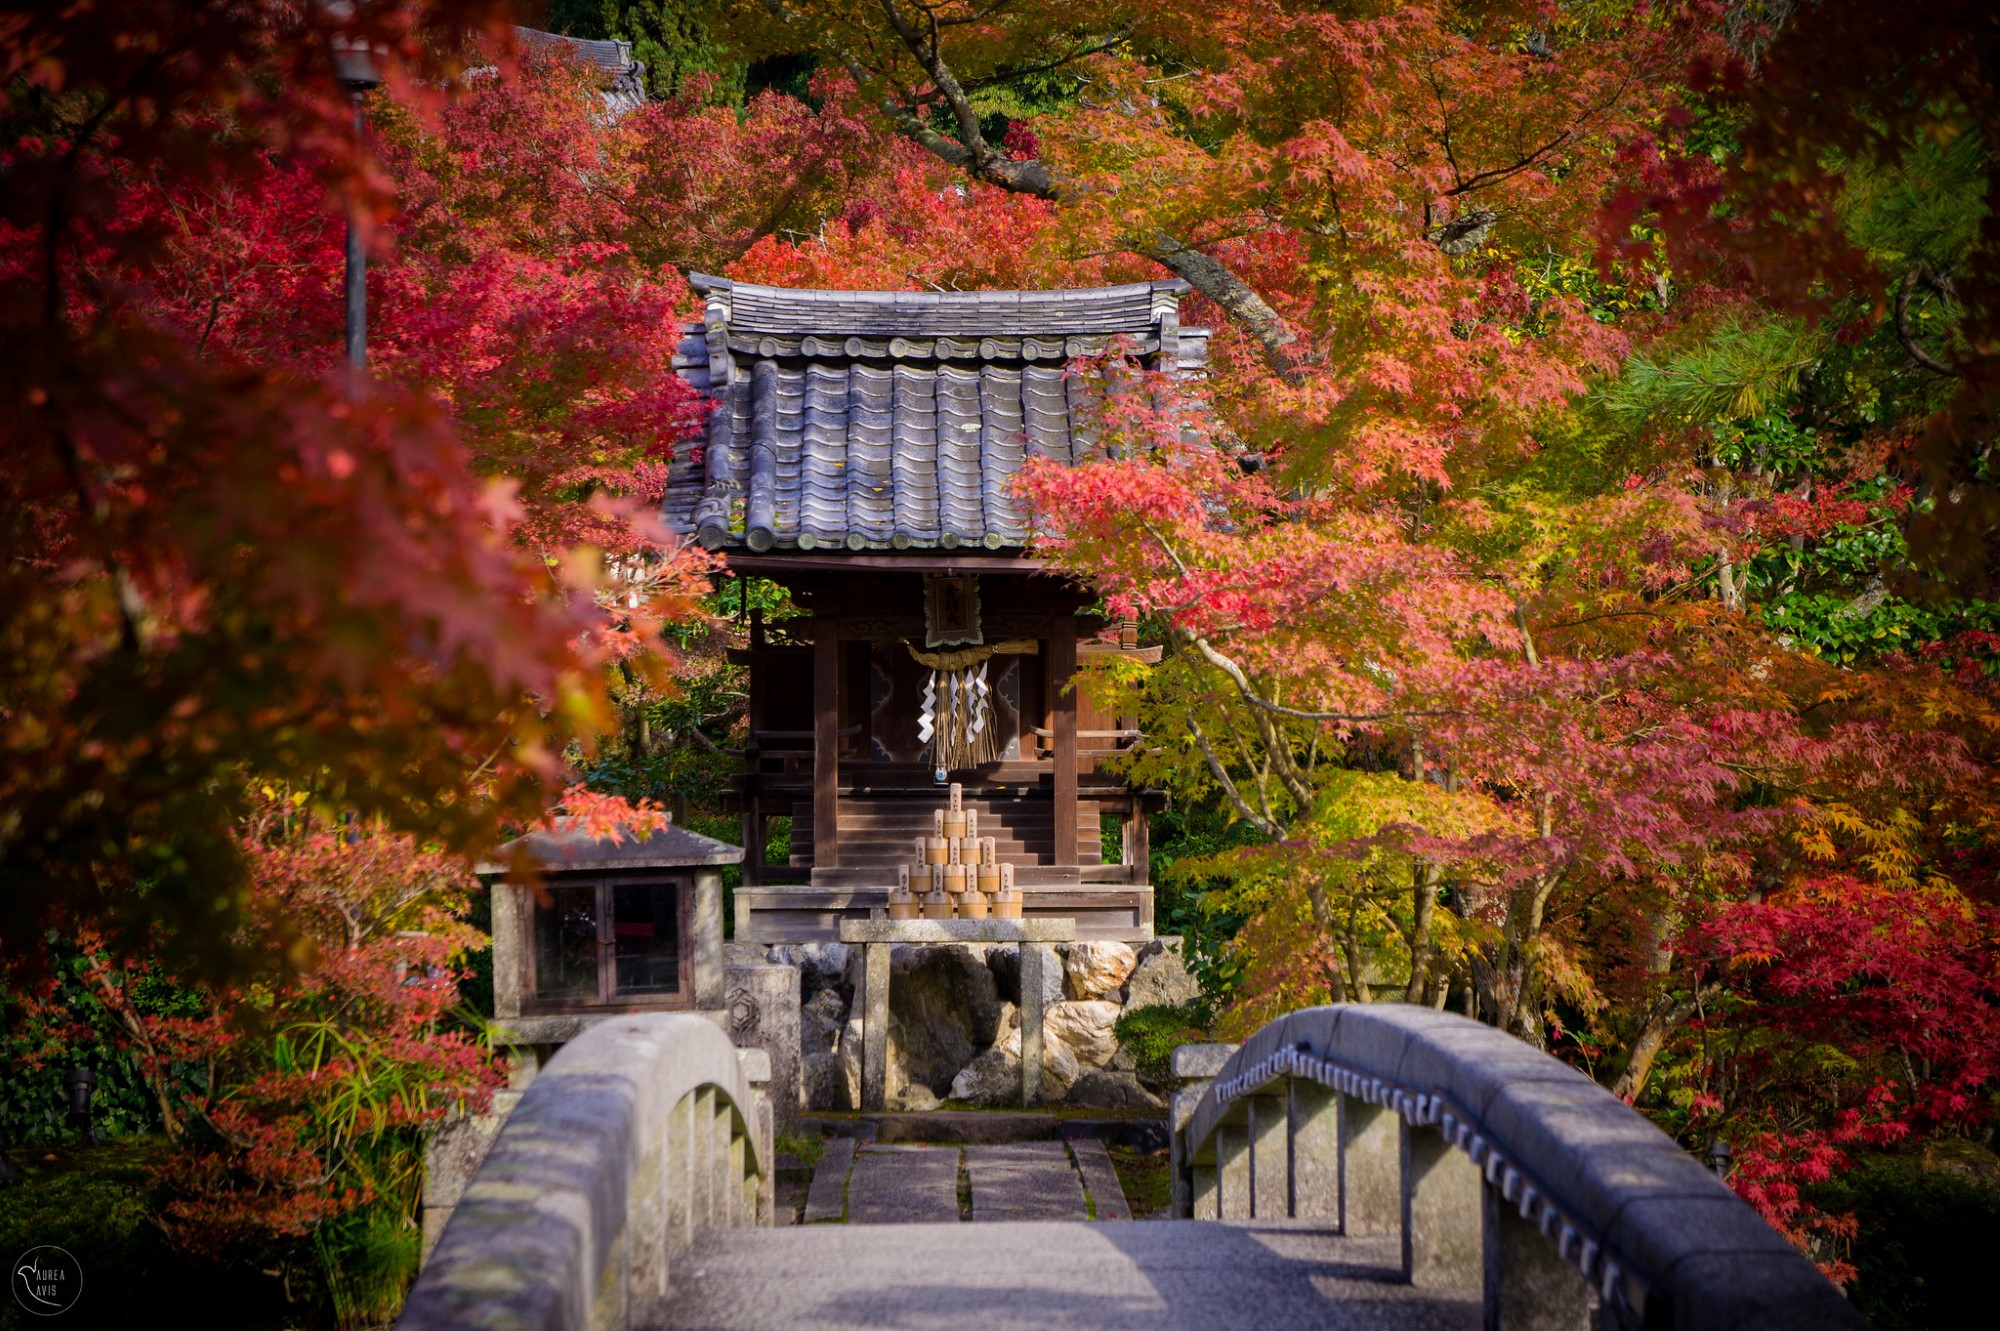 Fall leaves at Eikando Temple. Credit: aurea-avis. Licensed under CC BY-ND 2.0.